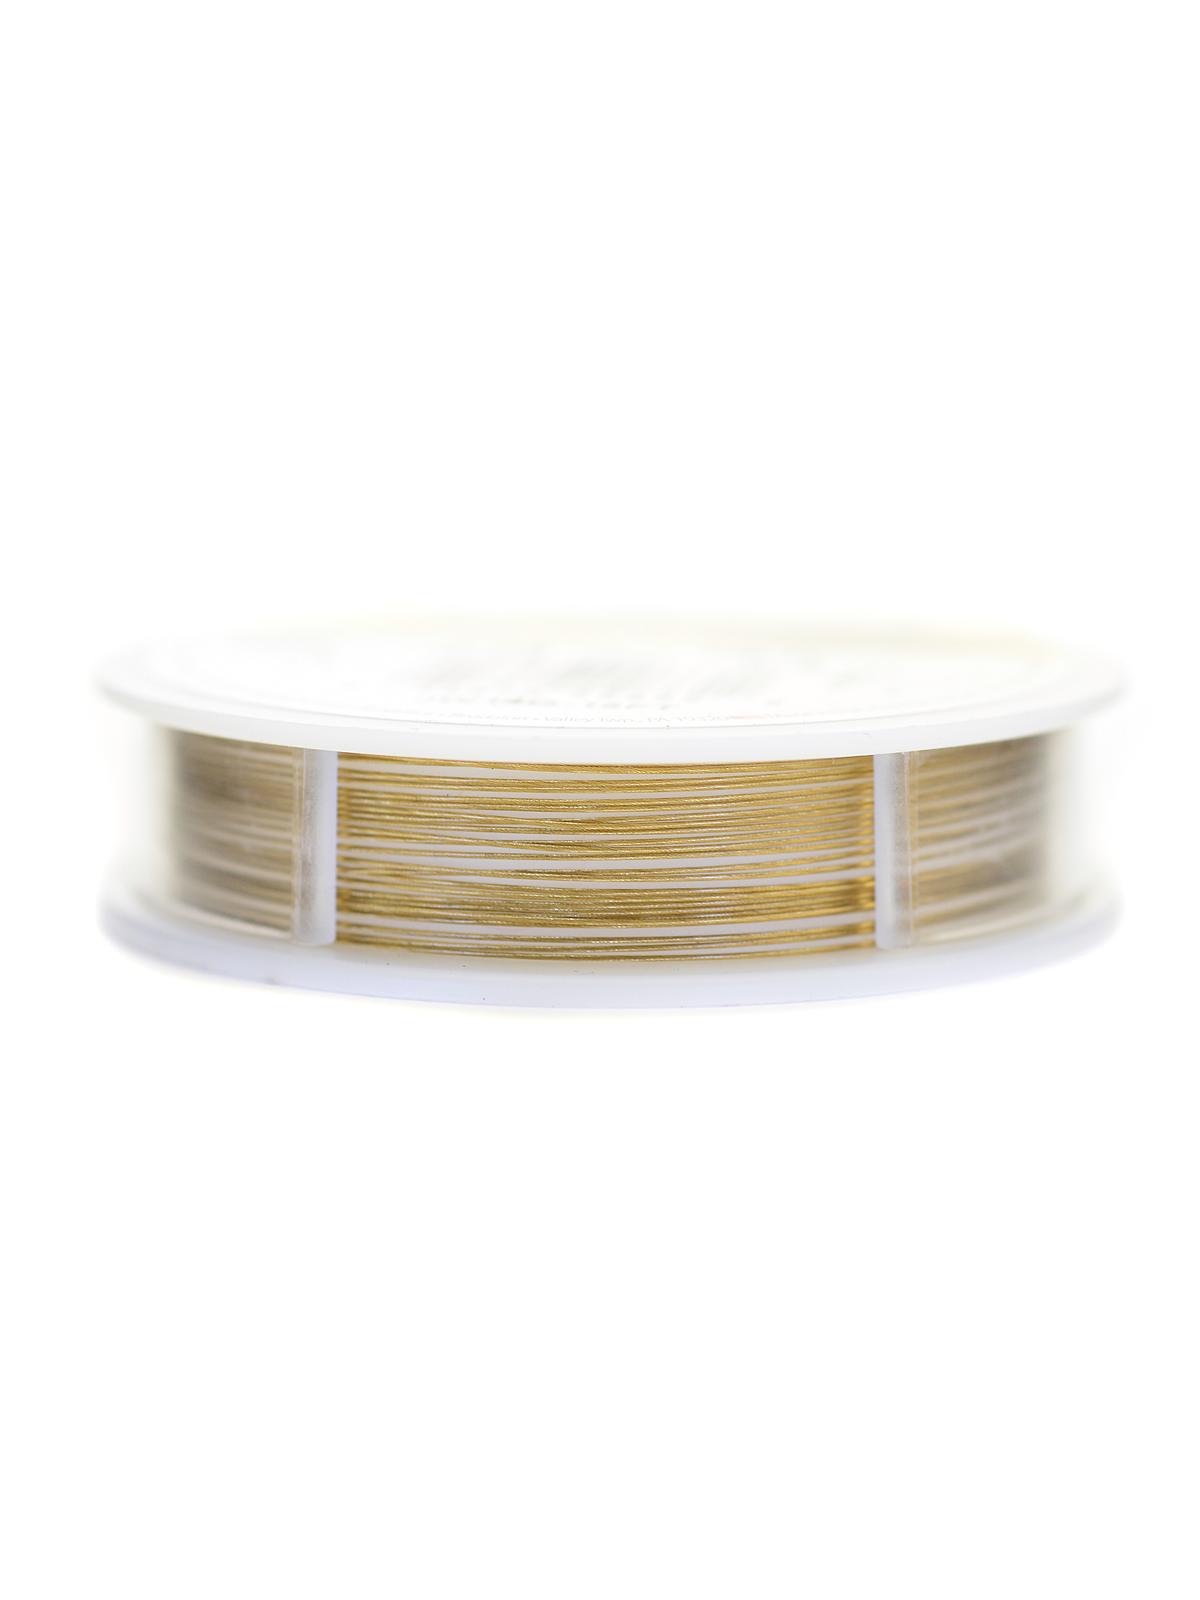 19 Strand Bead Stringing Wire Metallic Gold Color .015 In. (0.38 Mm) 15 Ft. Spool